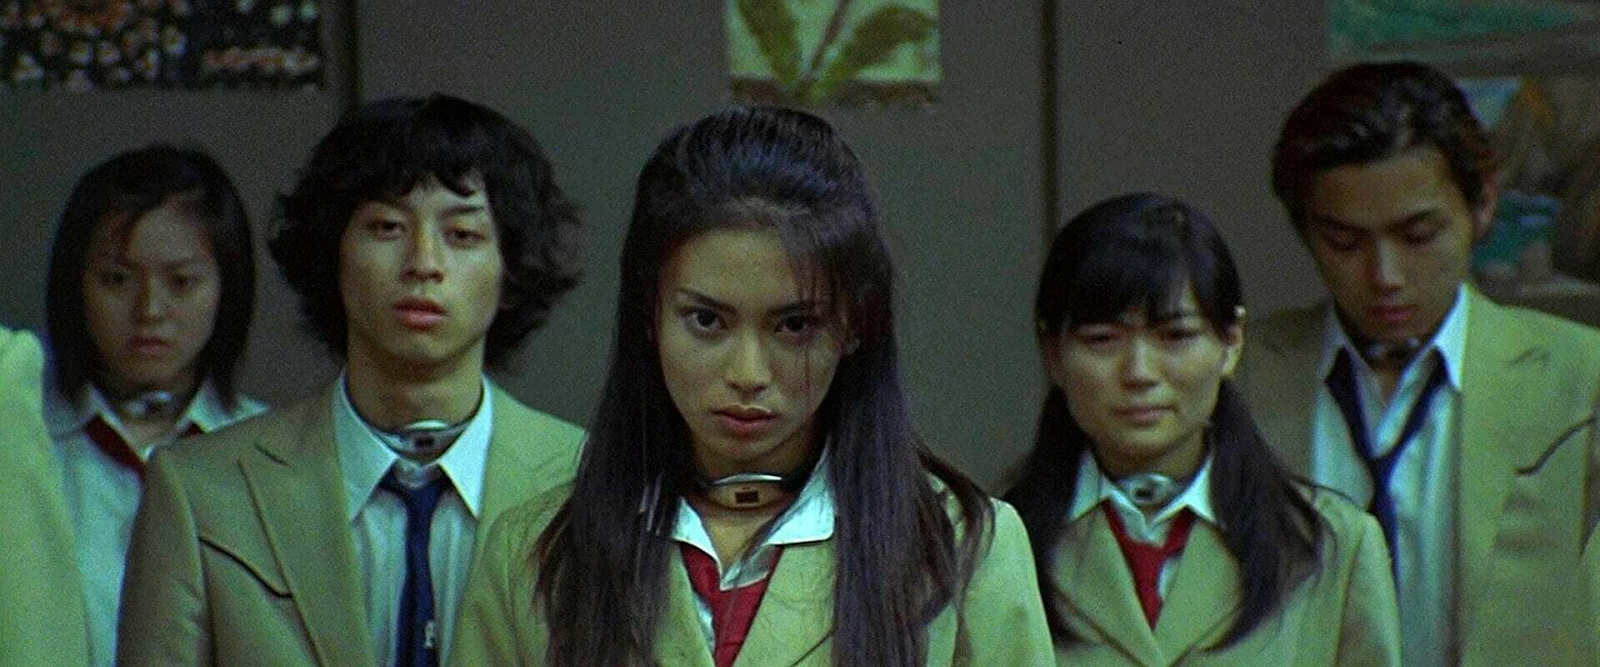 Still image from the film Battle Royale (2000)